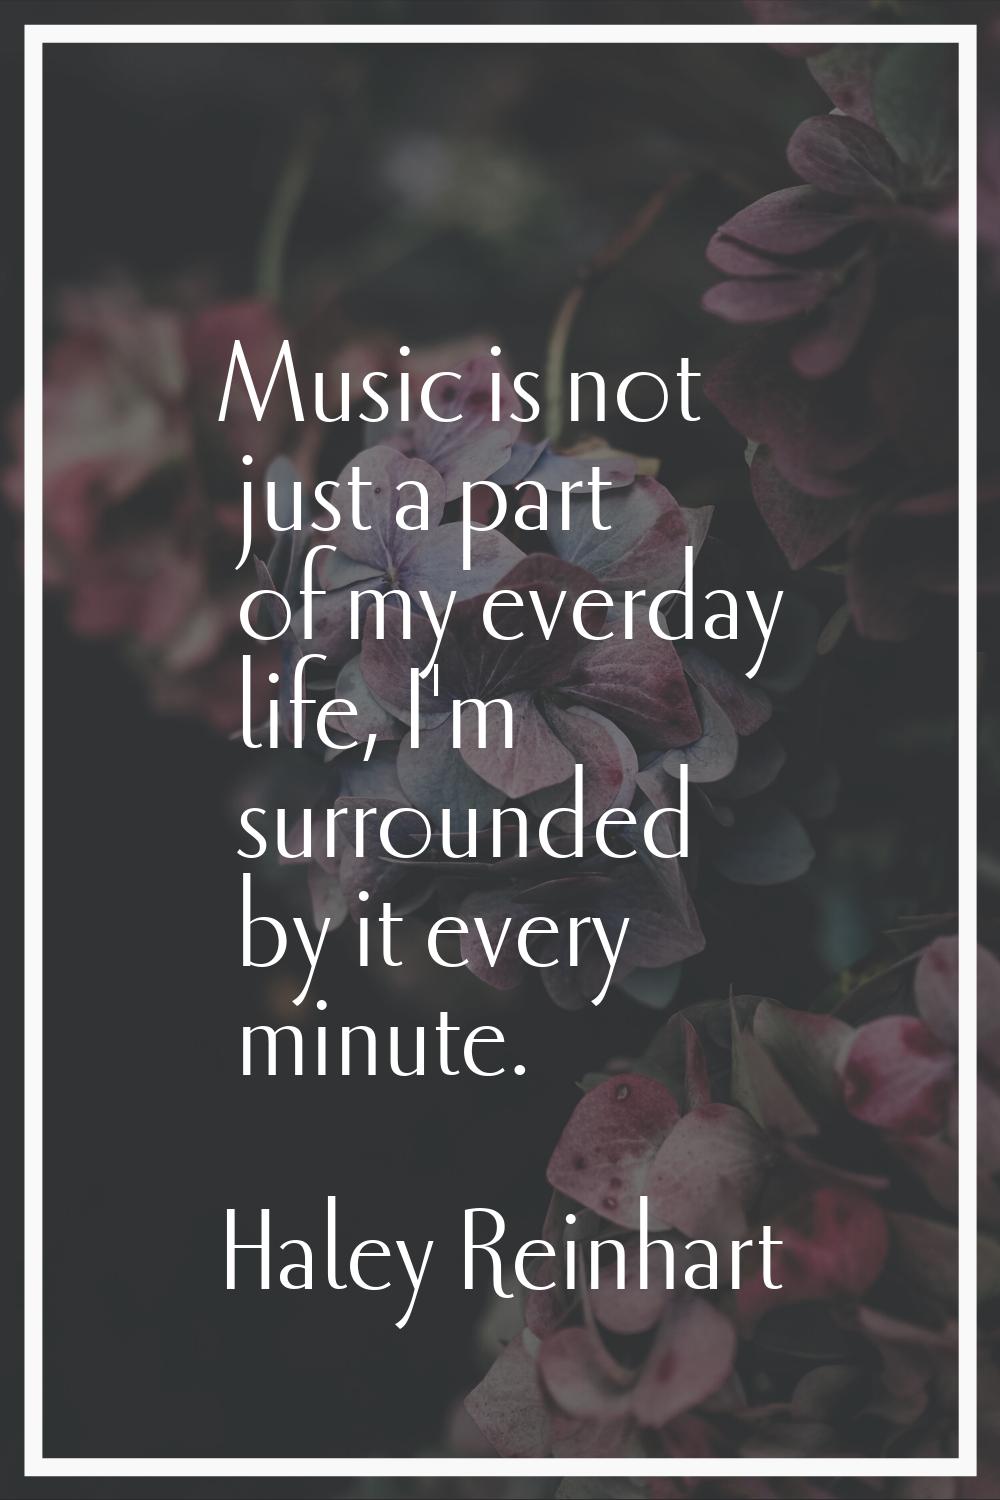 Music is not just a part of my everday life, I'm surrounded by it every minute.